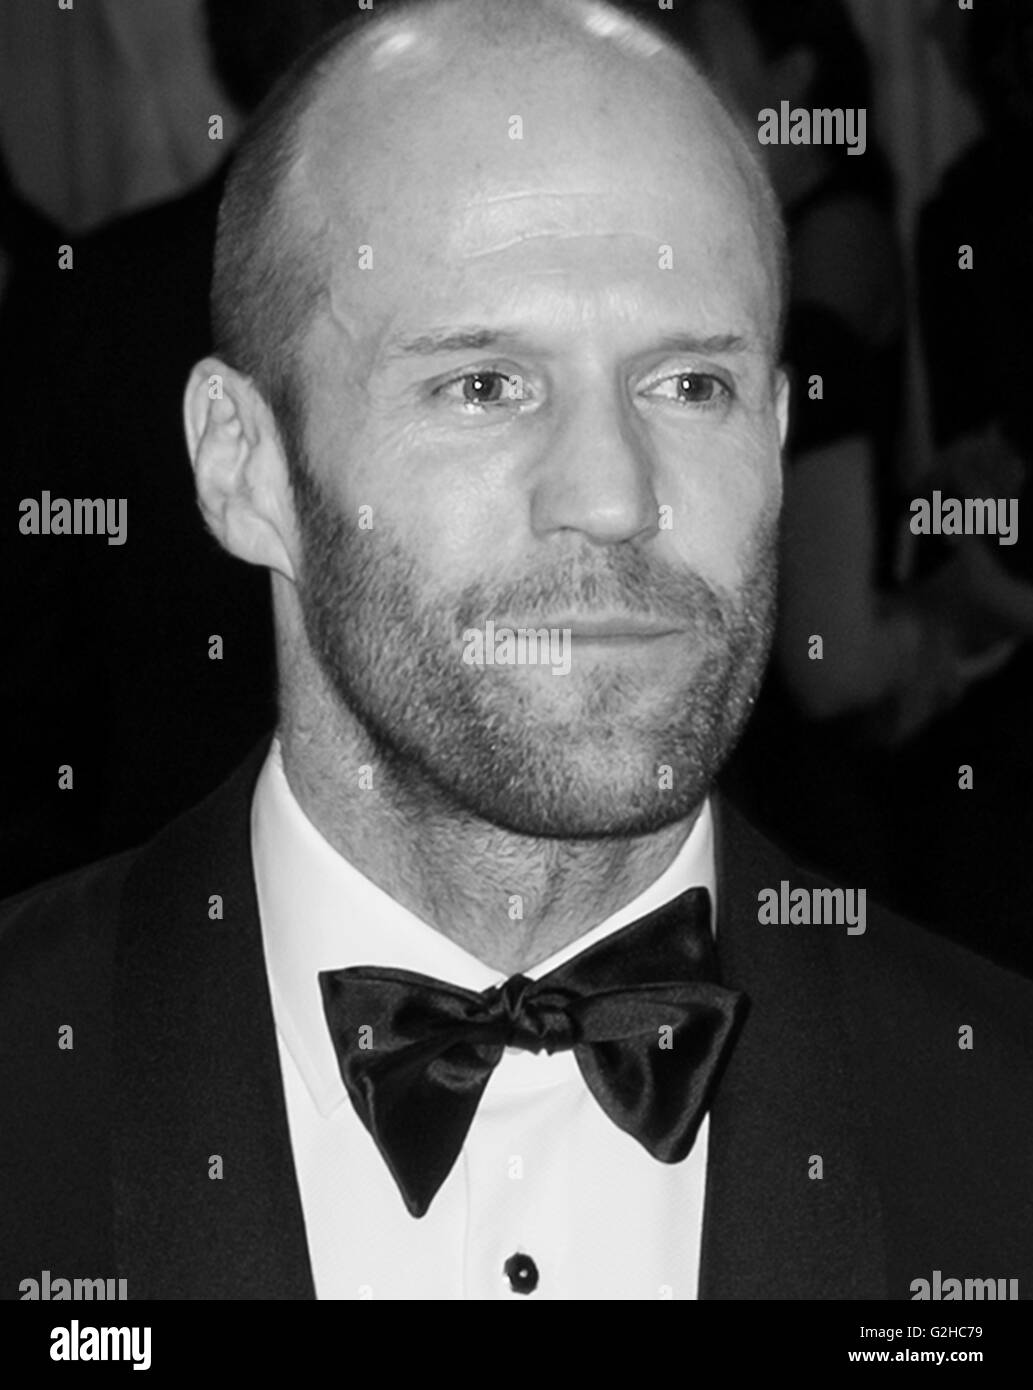 New York City, USA - May 2, 2016: Actor Jason Statham attends the 2016 Met Gala Stock Photo